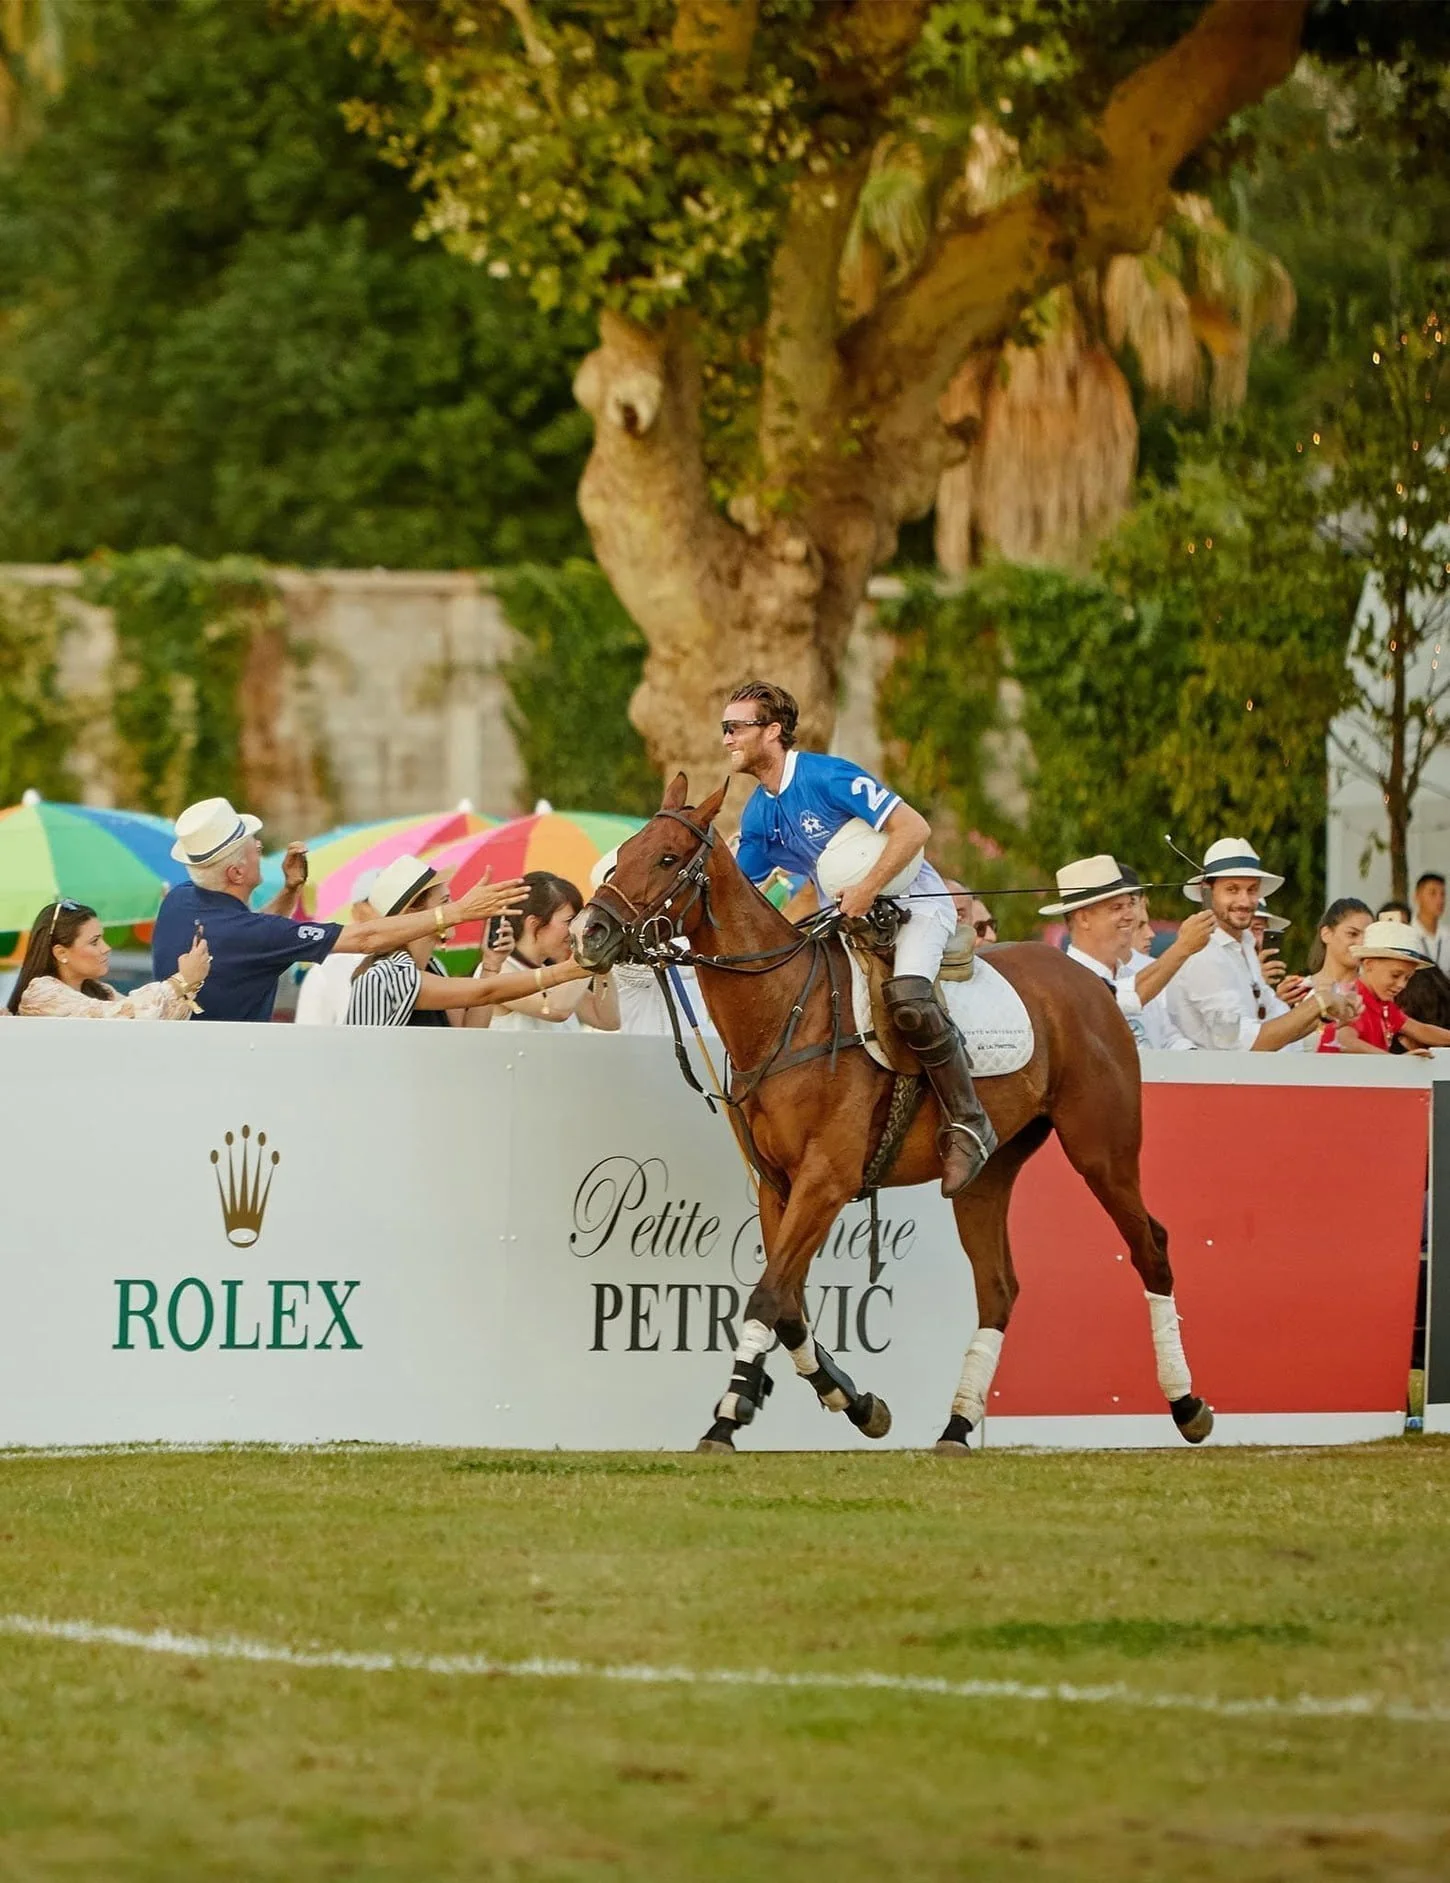 Man on horse playing polo